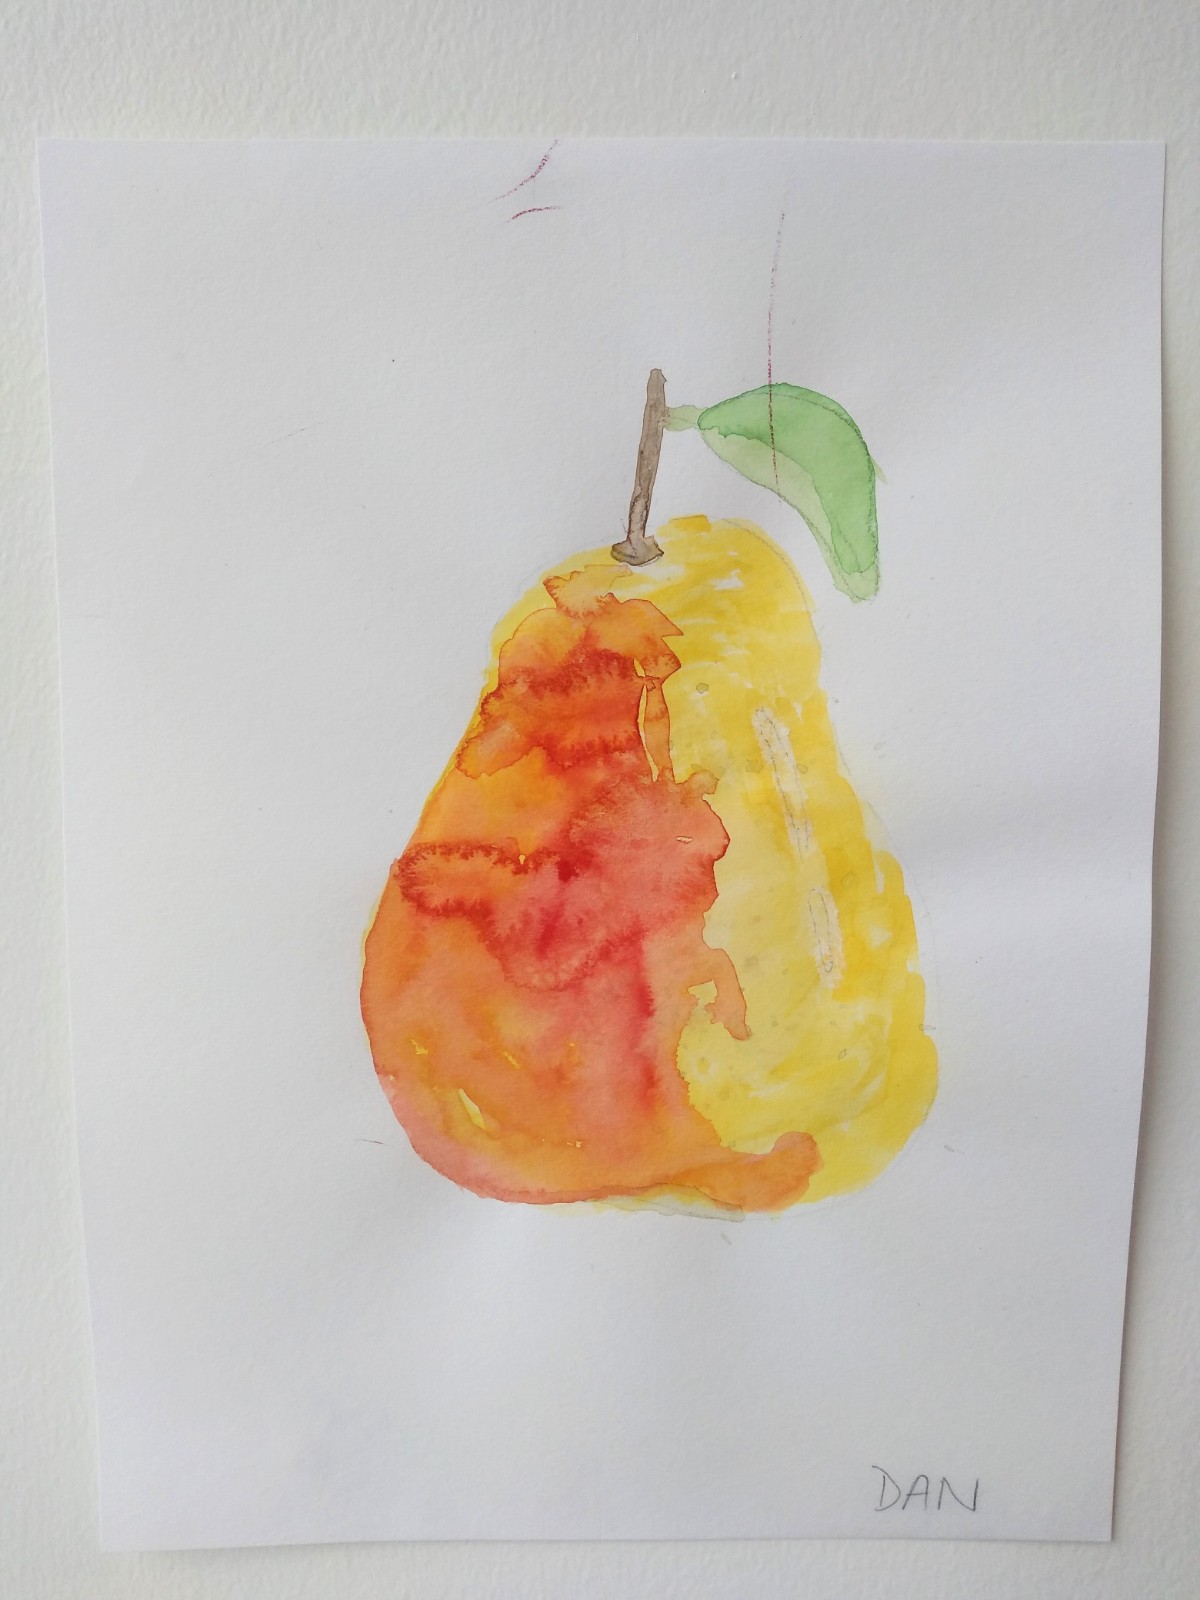 An orange and yellow pear.